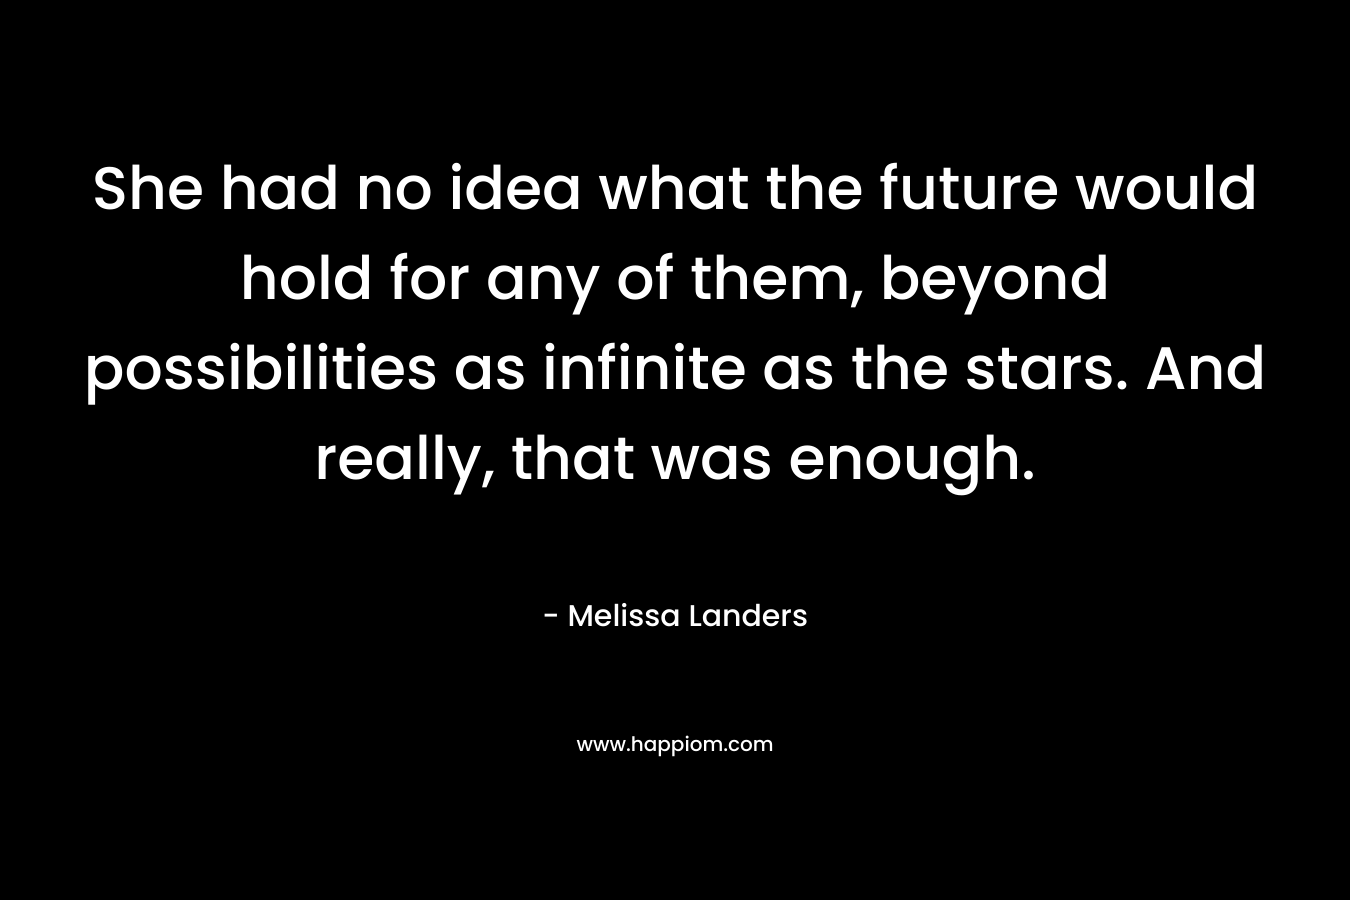 She had no idea what the future would hold for any of them, beyond possibilities as infinite as the stars. And really, that was enough. – Melissa Landers